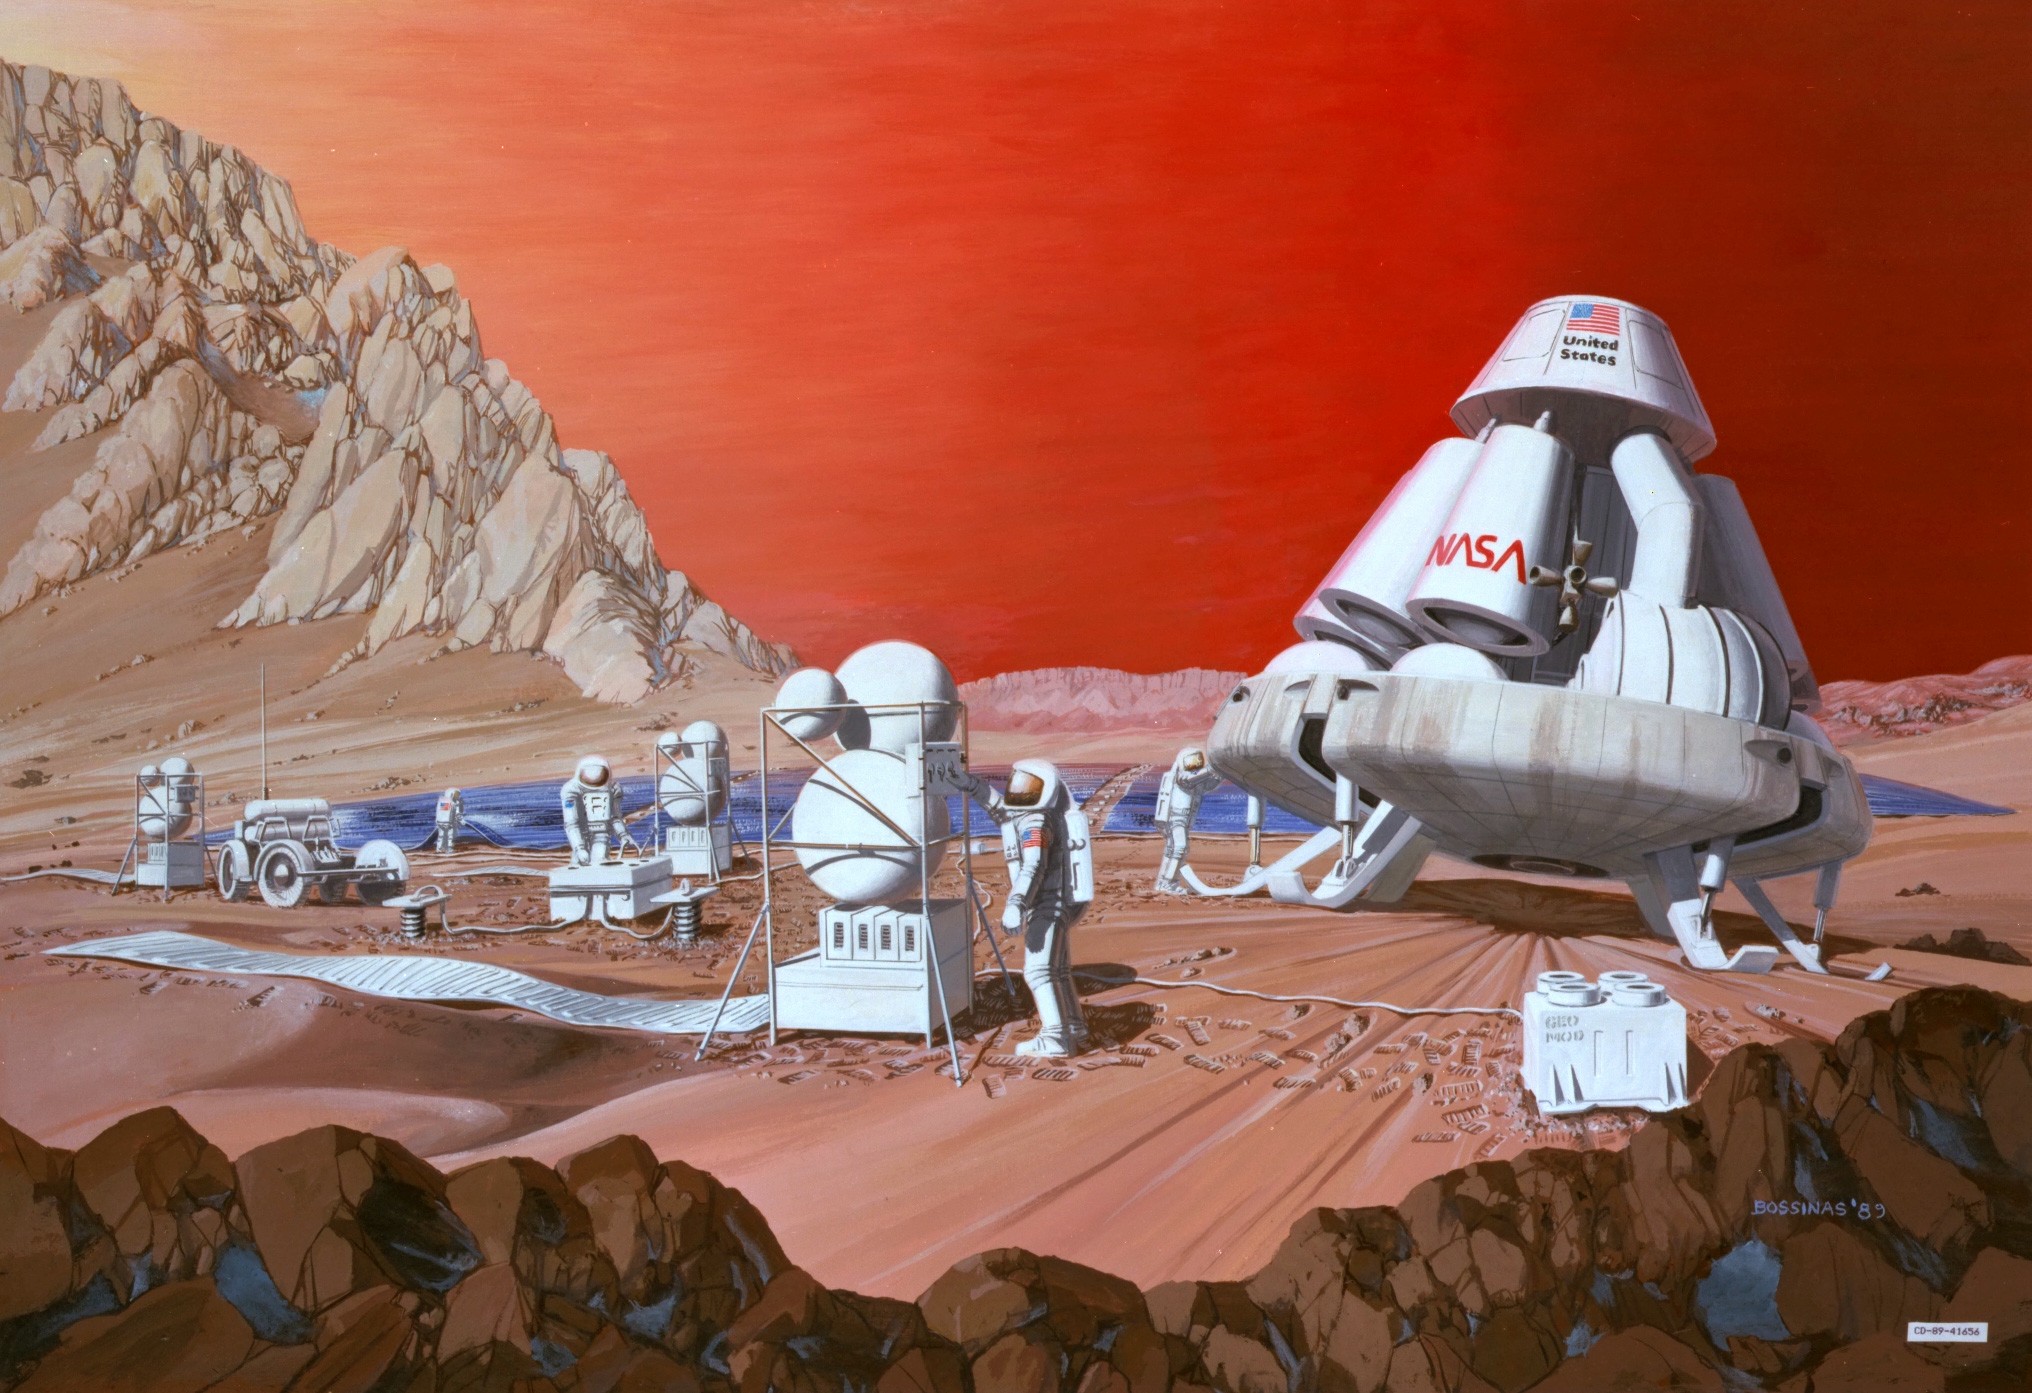 Mars mission - Retro Gallery Archive (Full Size)